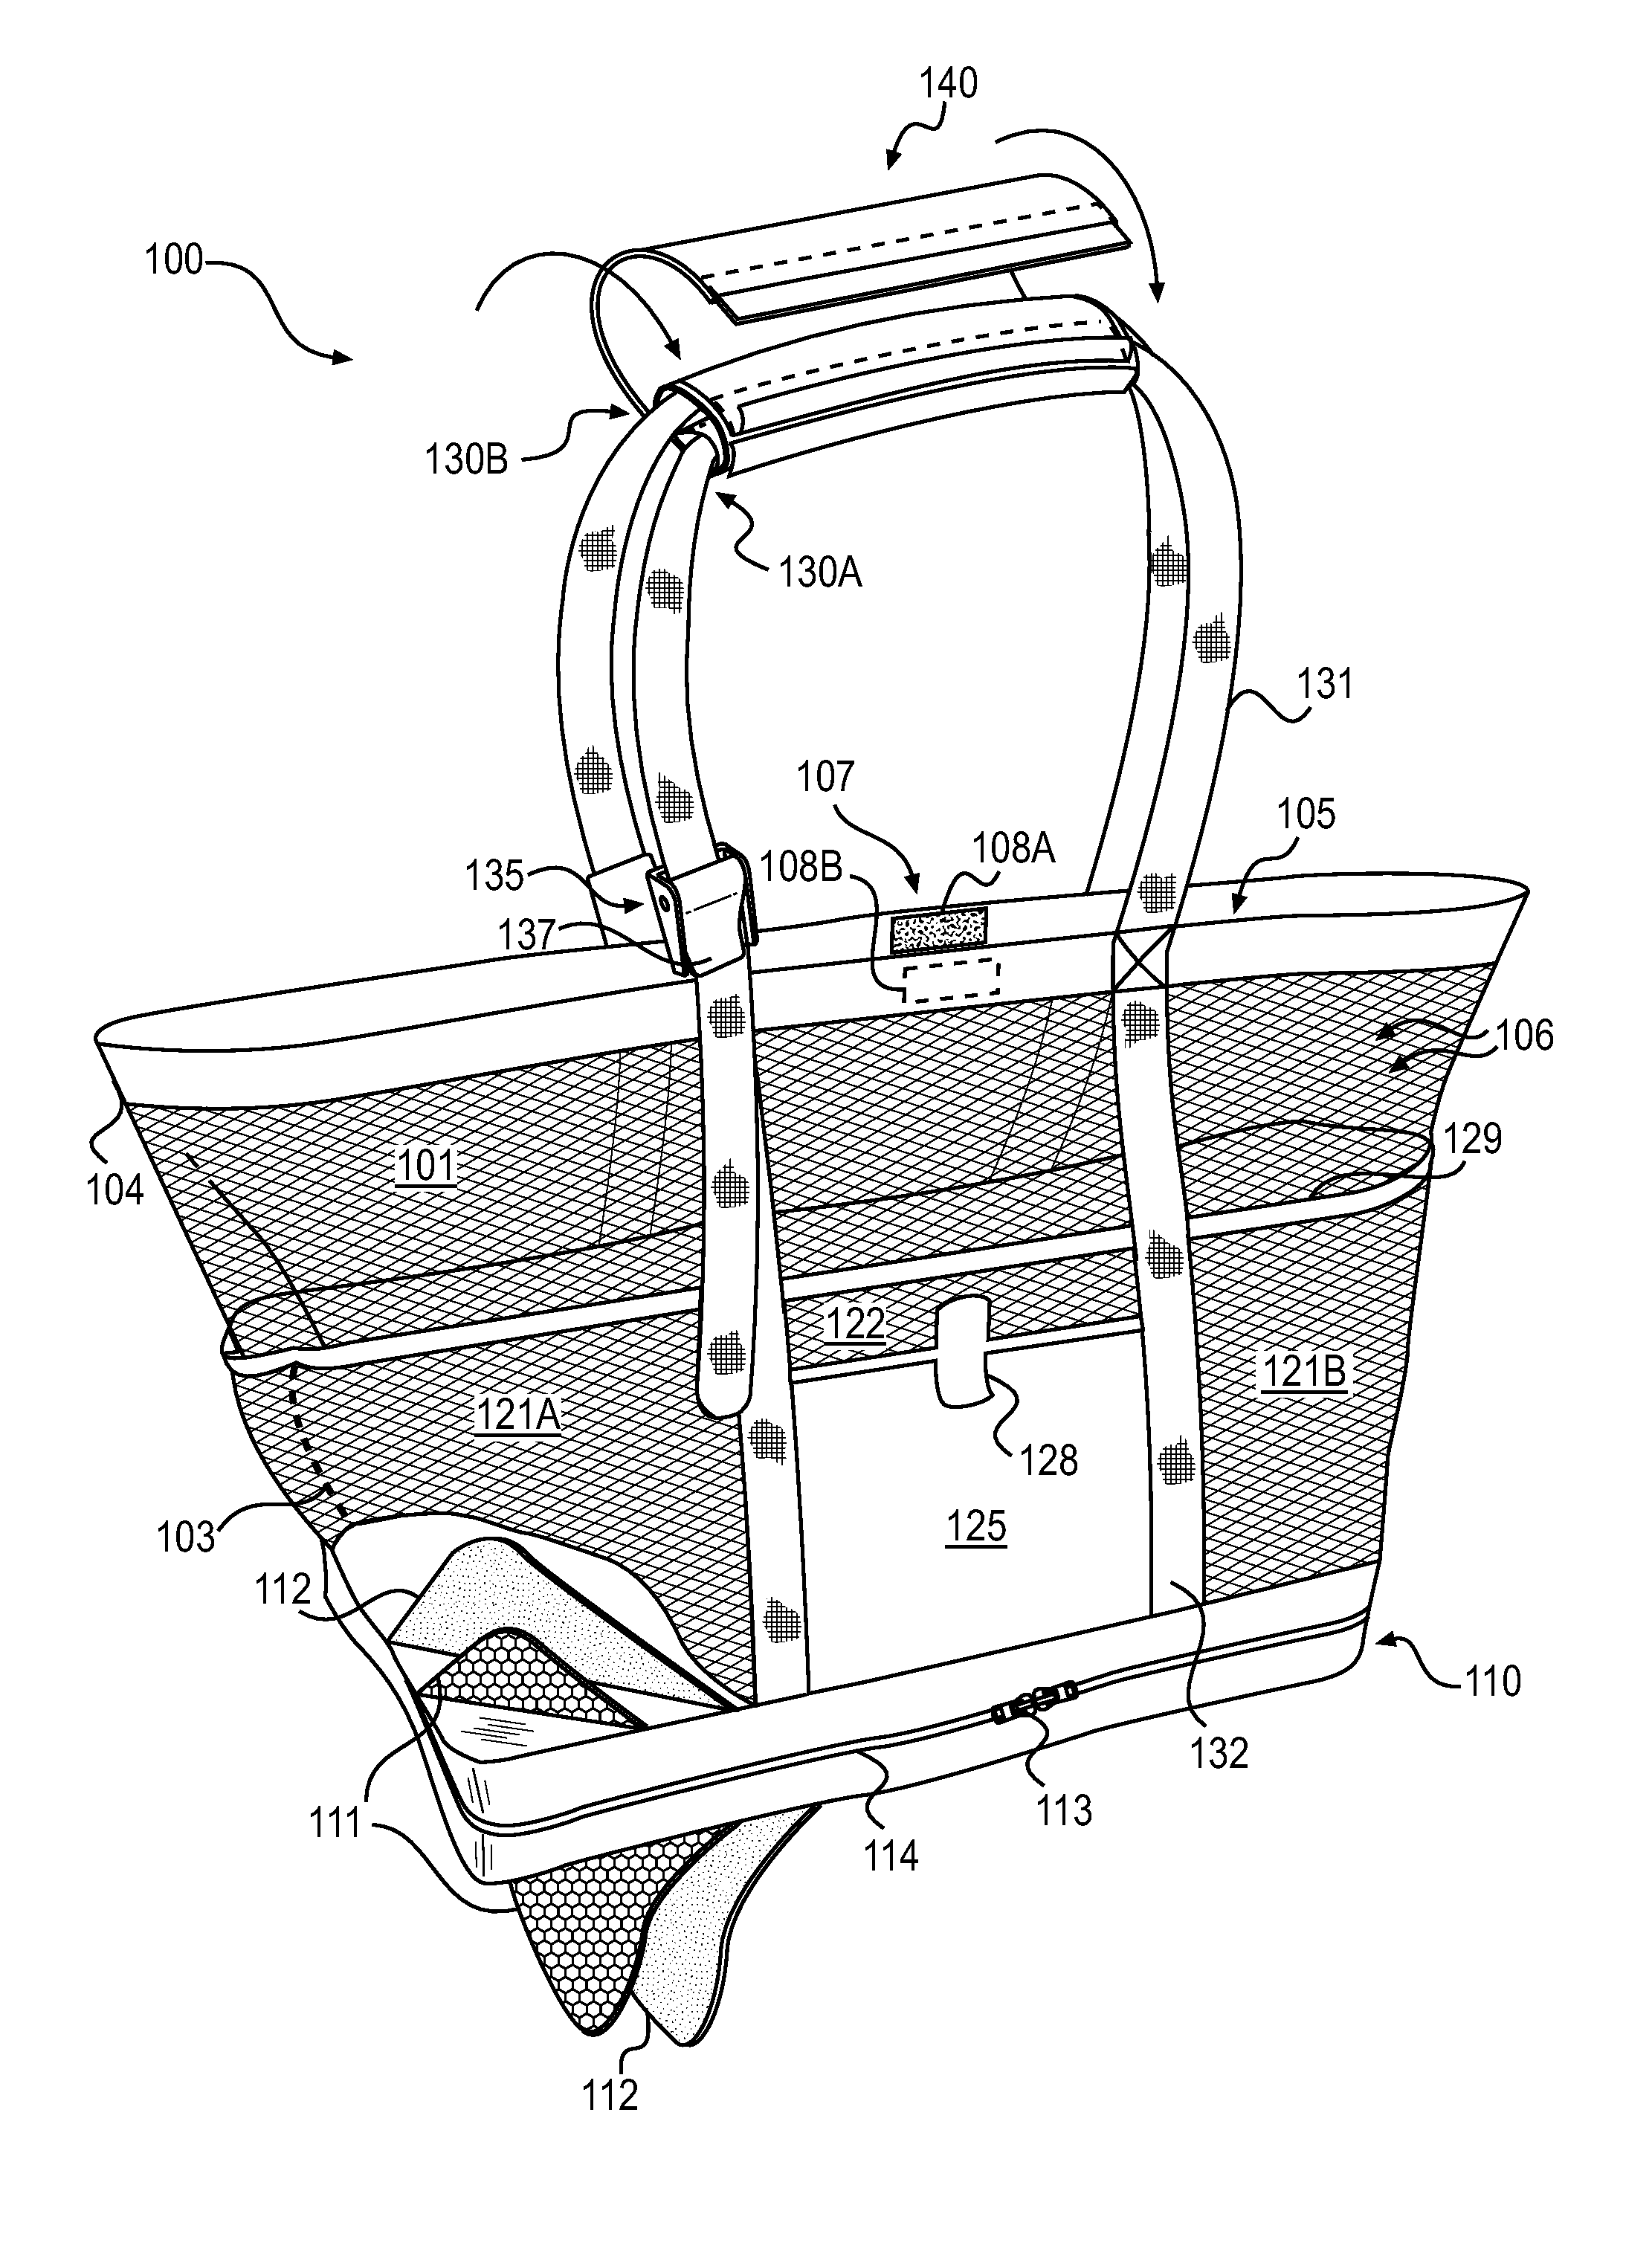 Self-supporting bag with insulated compartment